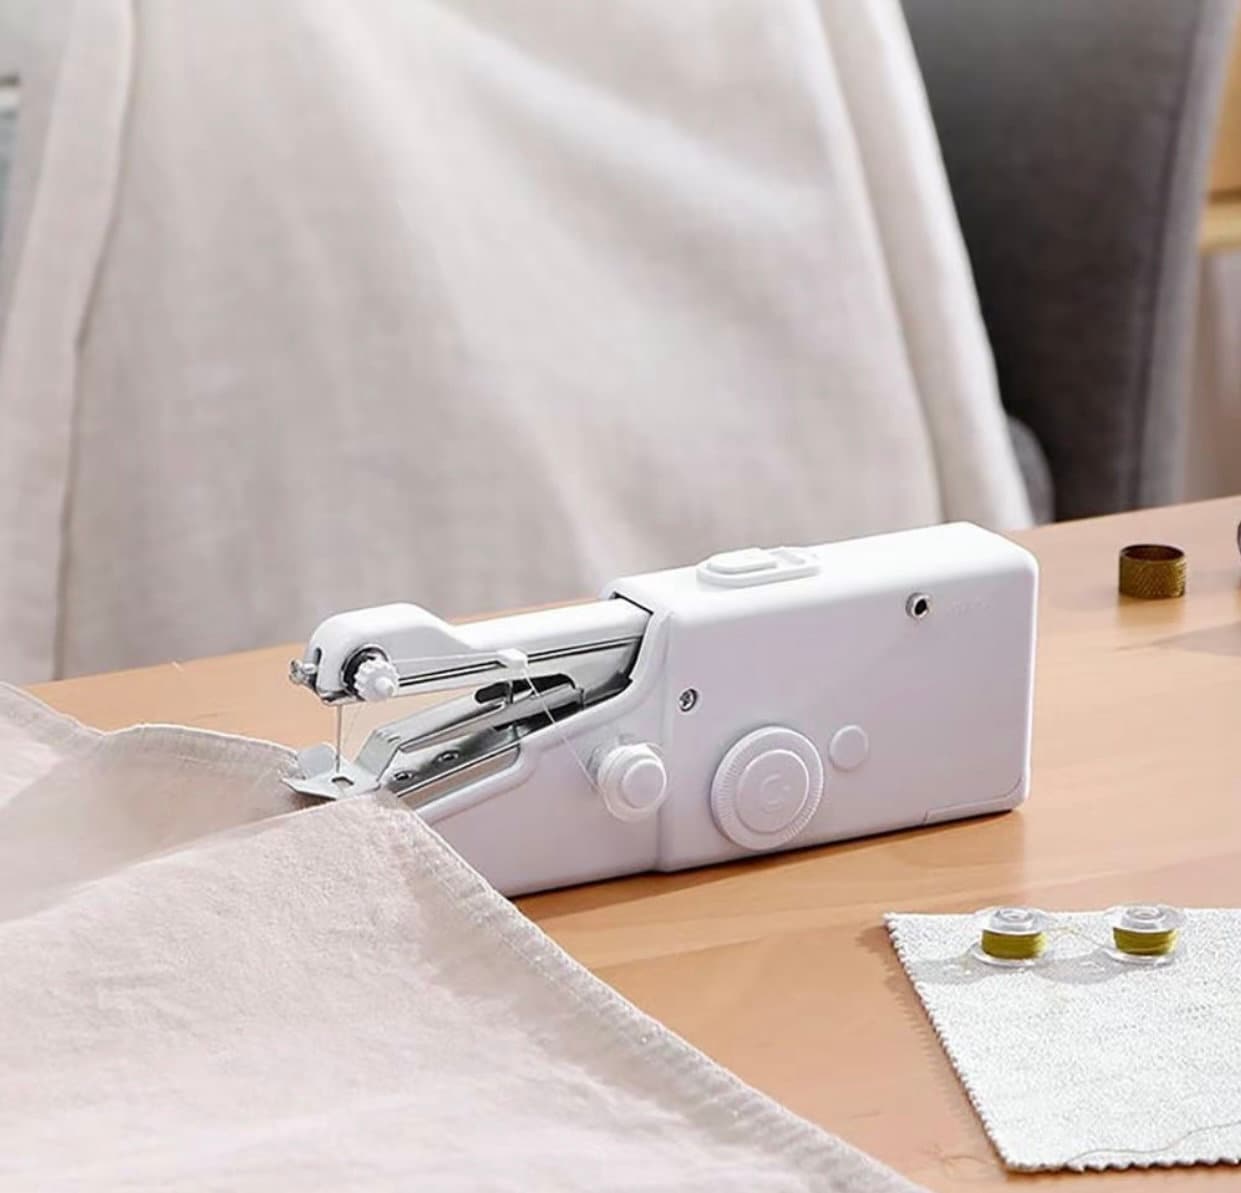 HandHeld Sewing Machine, Electric Hand Held Sewing Machine, Mini Portable  Cordless Sewing Machine for Beginners and Adults